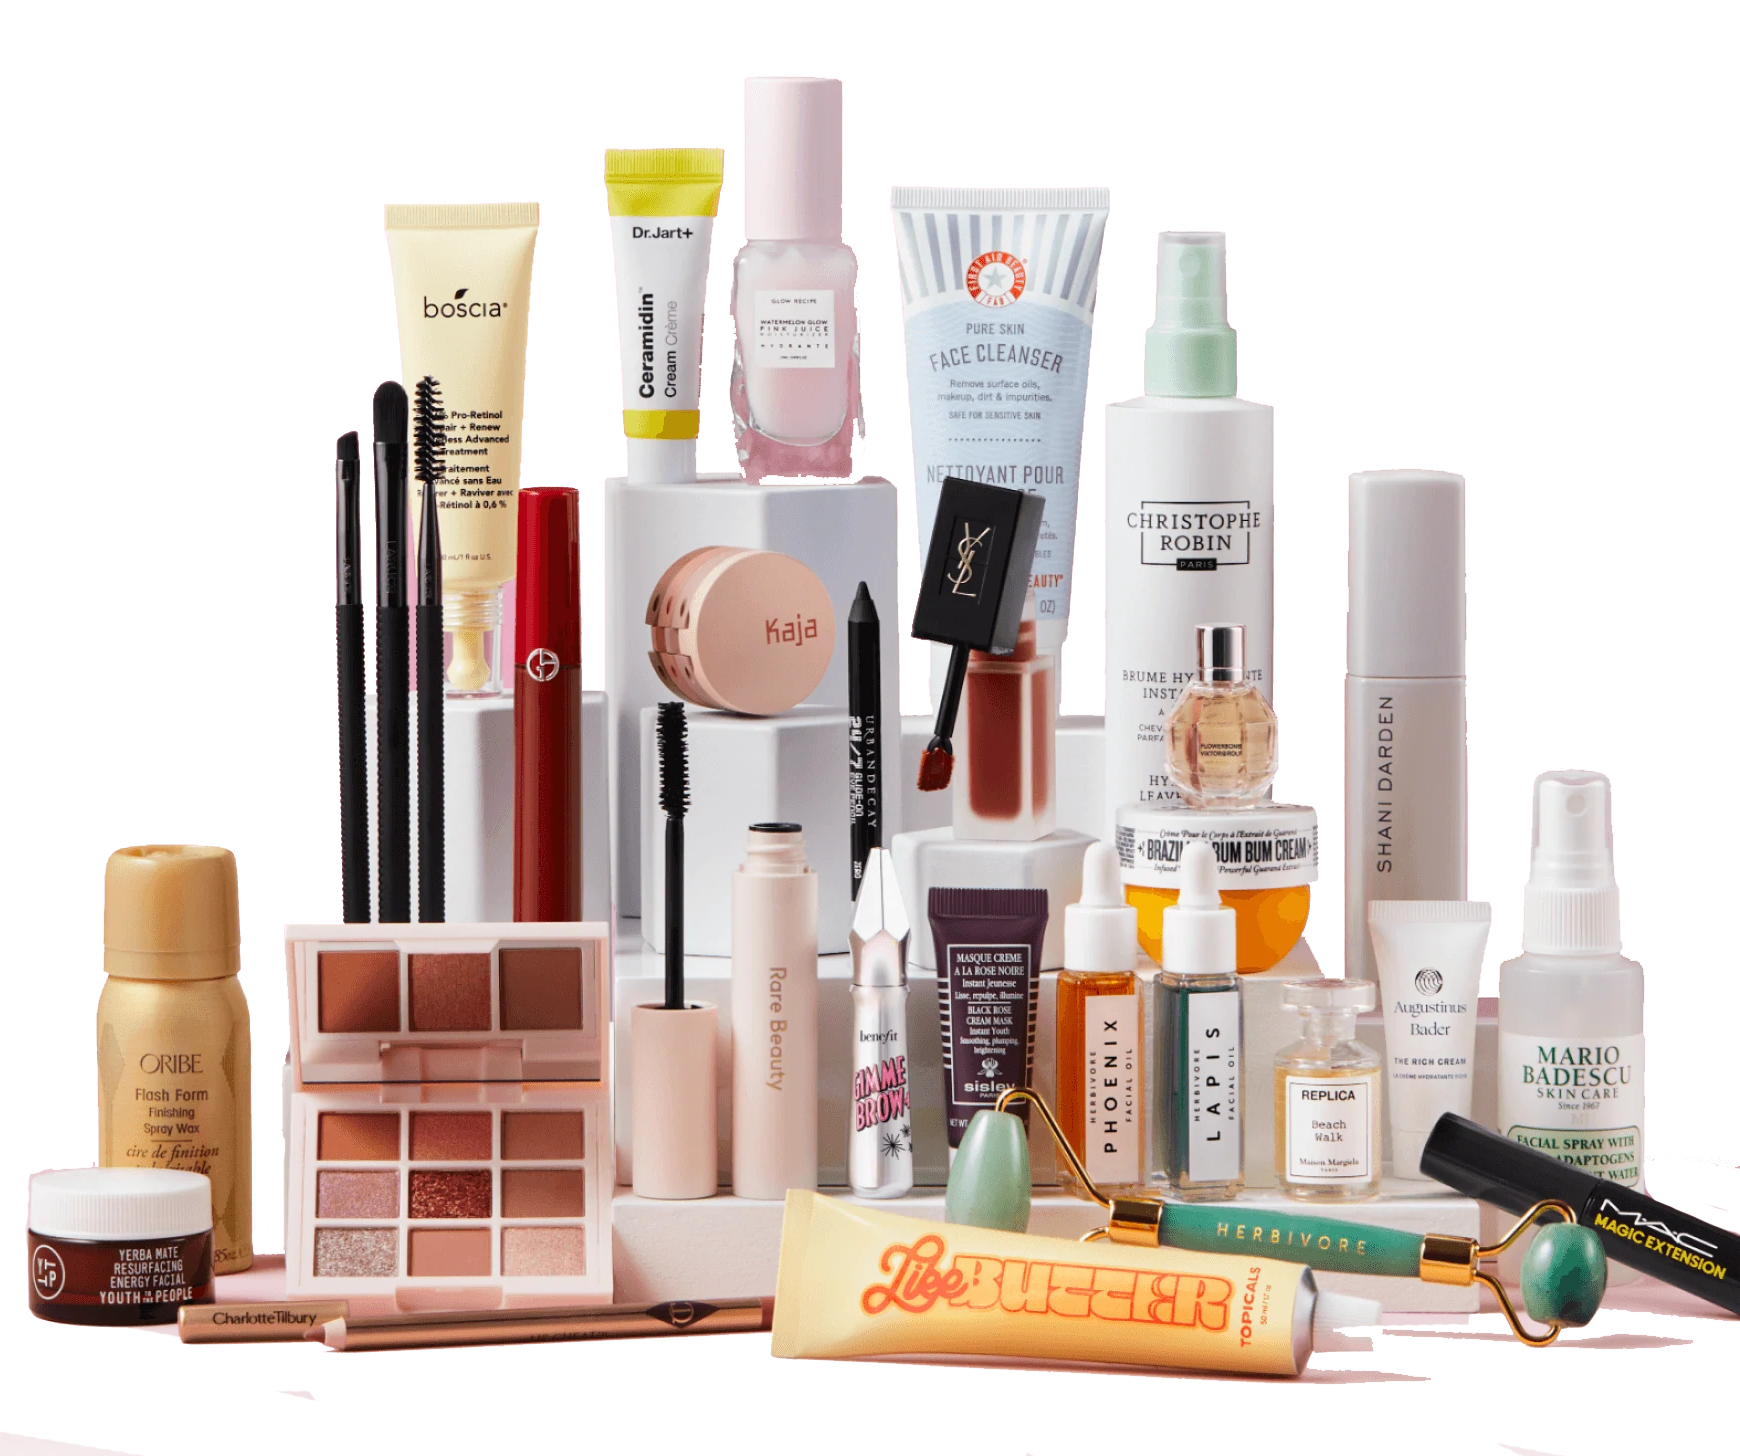 Pink background with products piled up